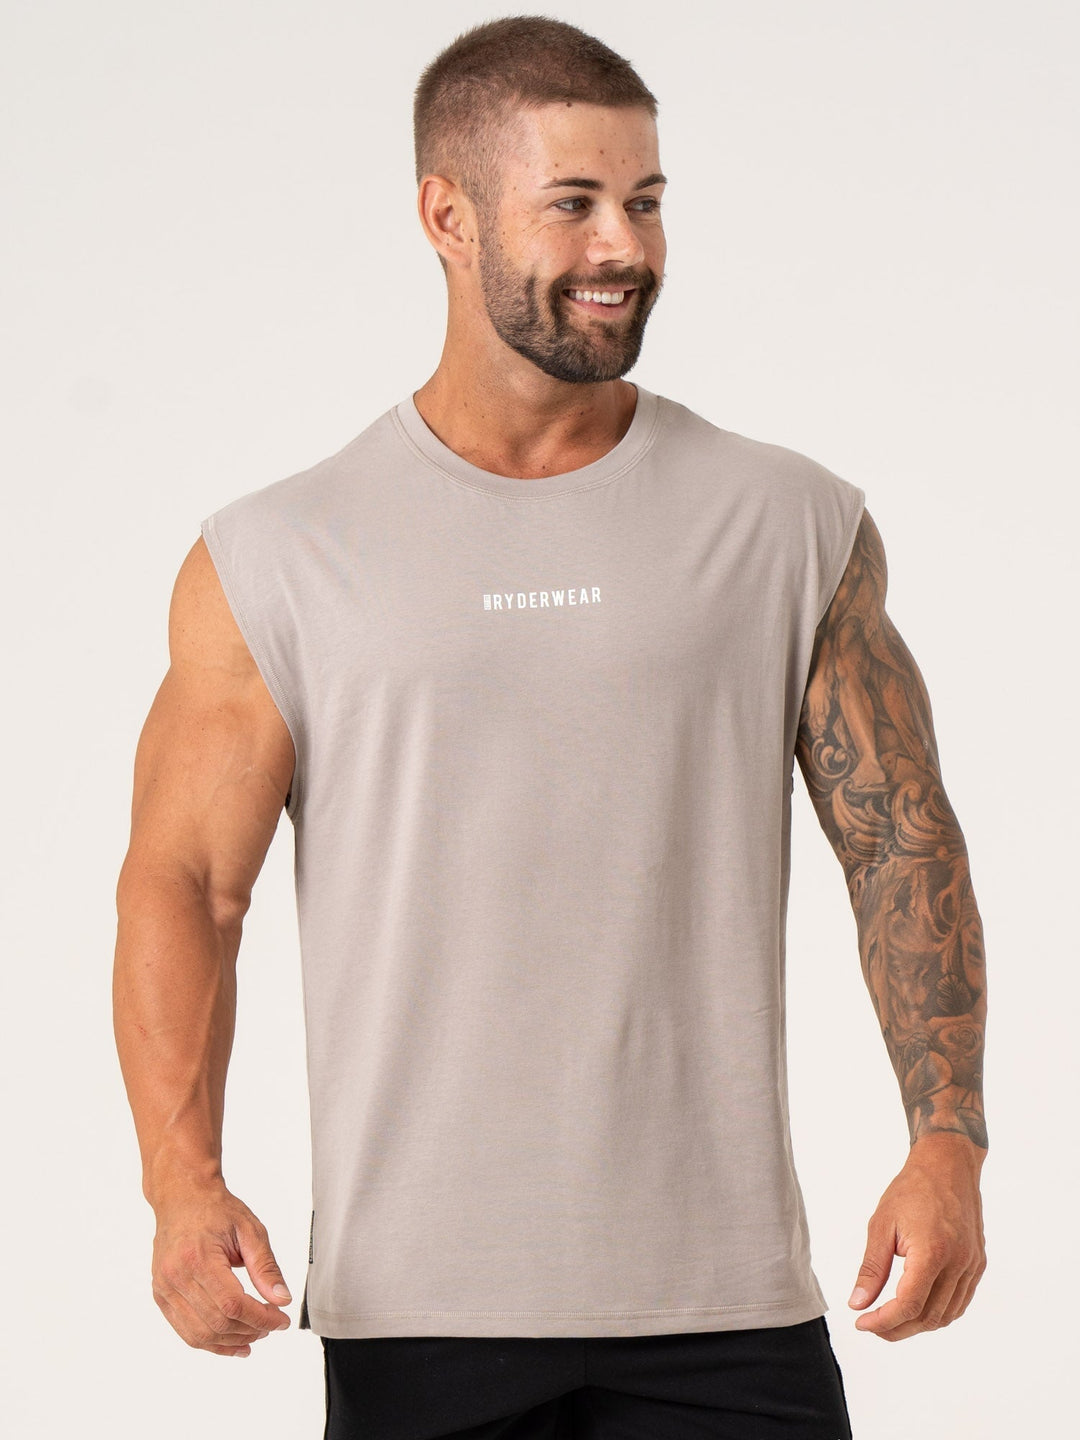 Pursuit Muscle Tank - Taupe Clothing Ryderwear 